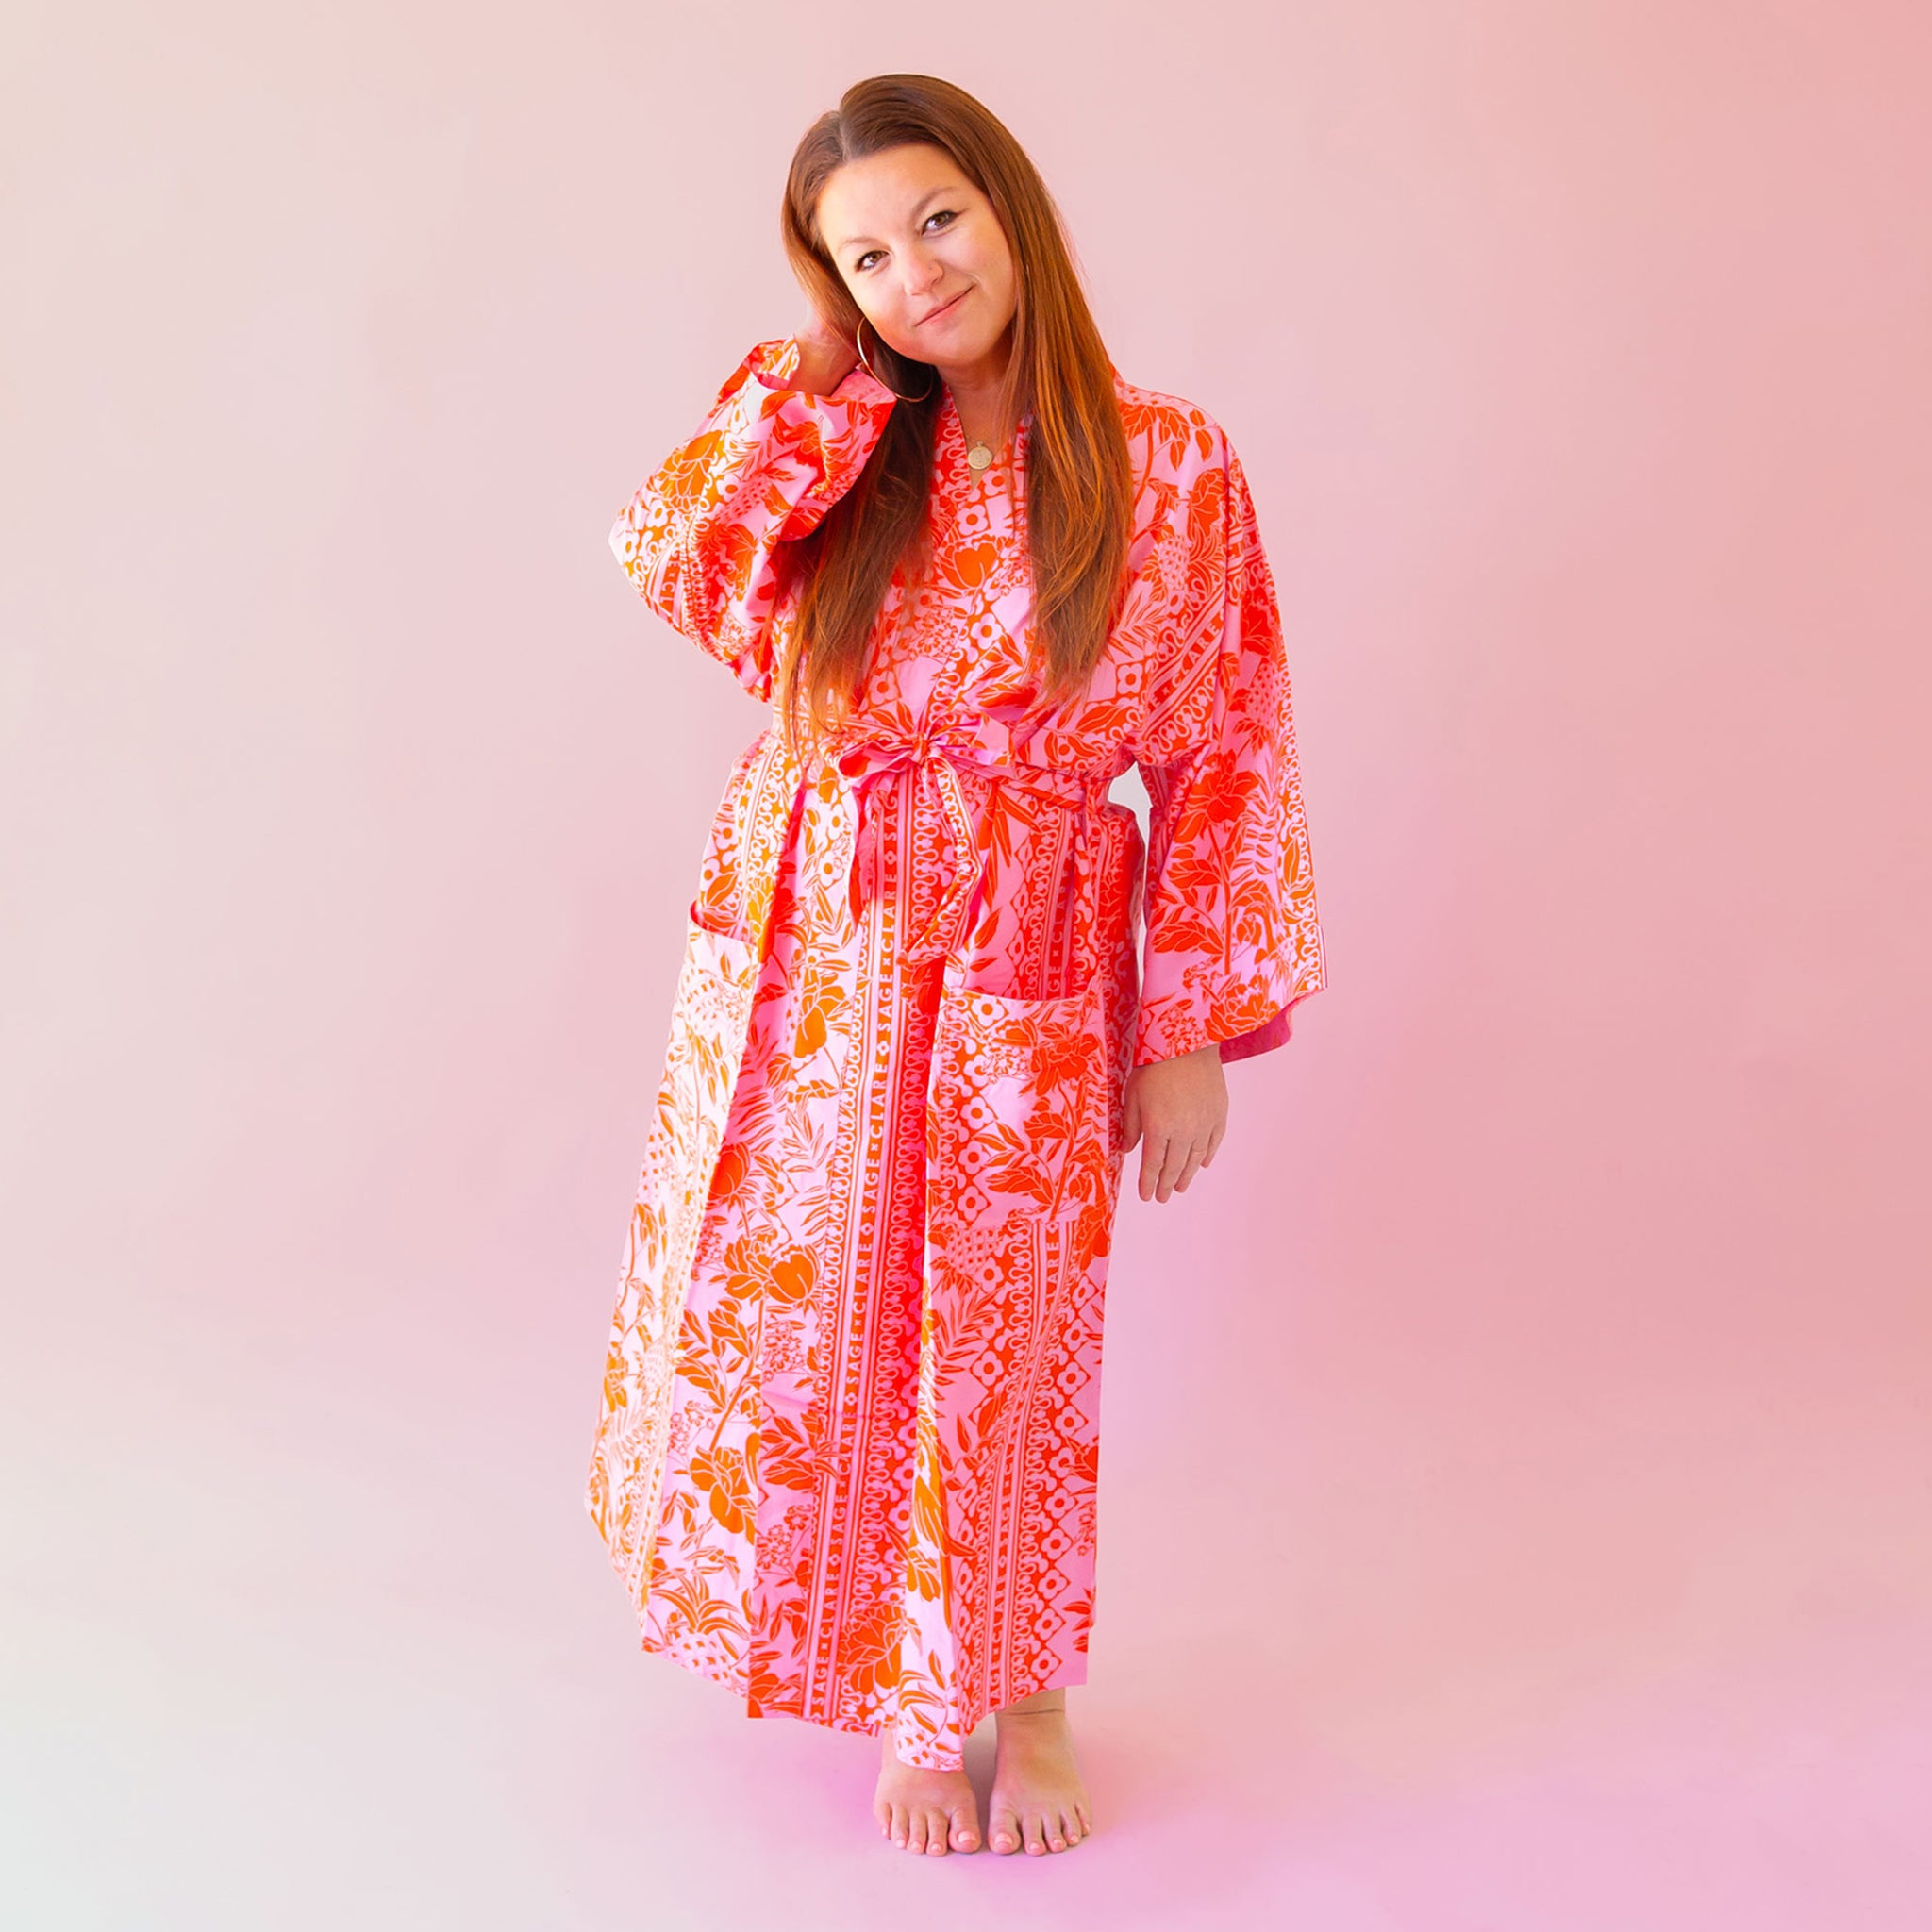 A cotton robe with pockets and an orange and hot pink tropical floral print.